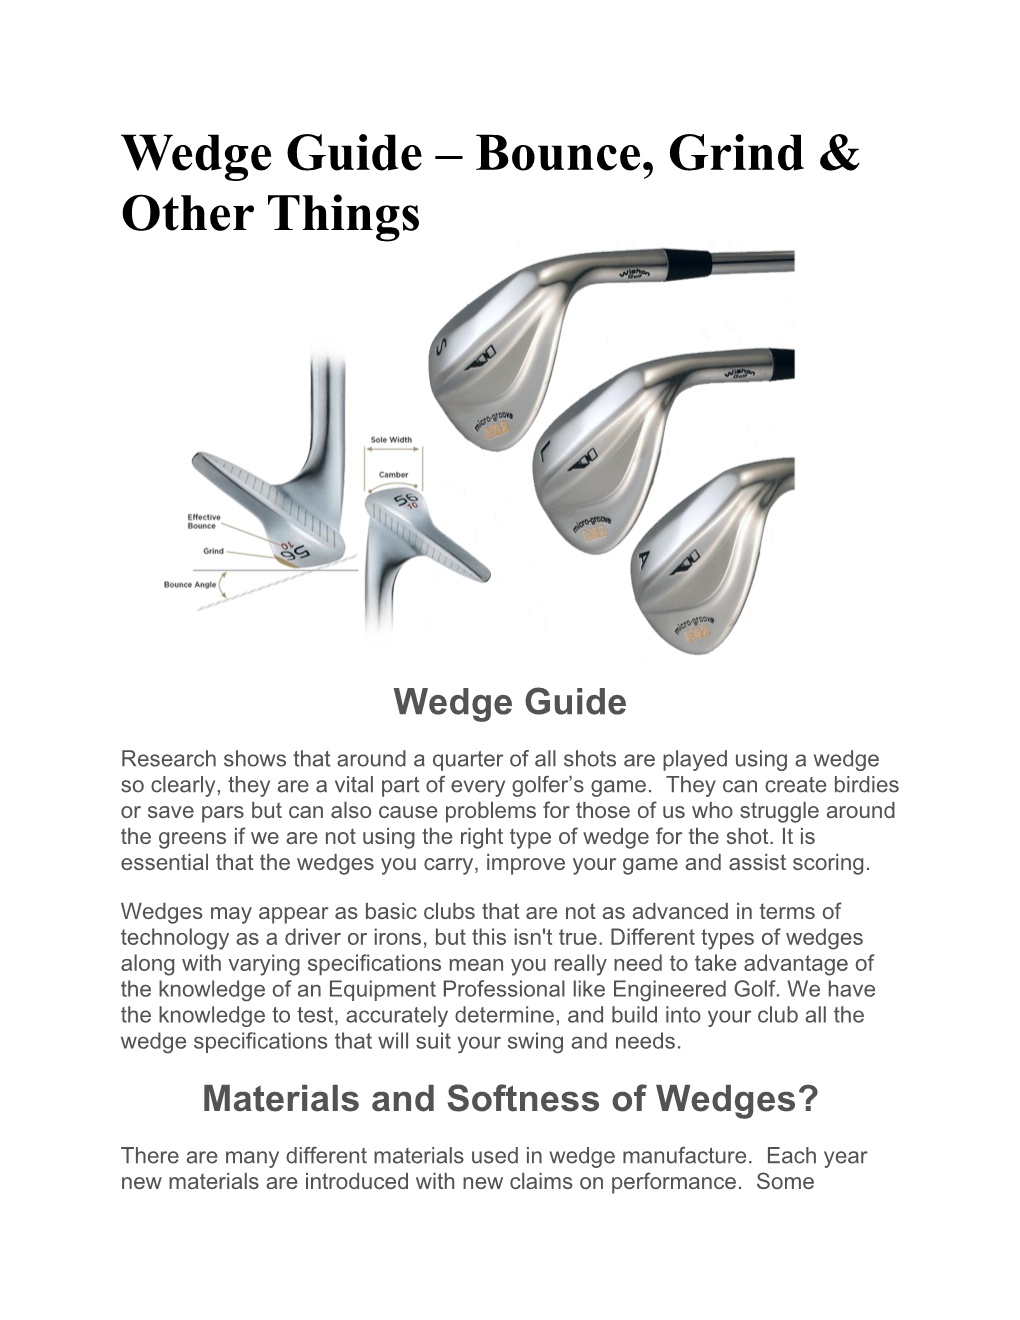 Wedge Guide – Bounce, Grind & Other Things